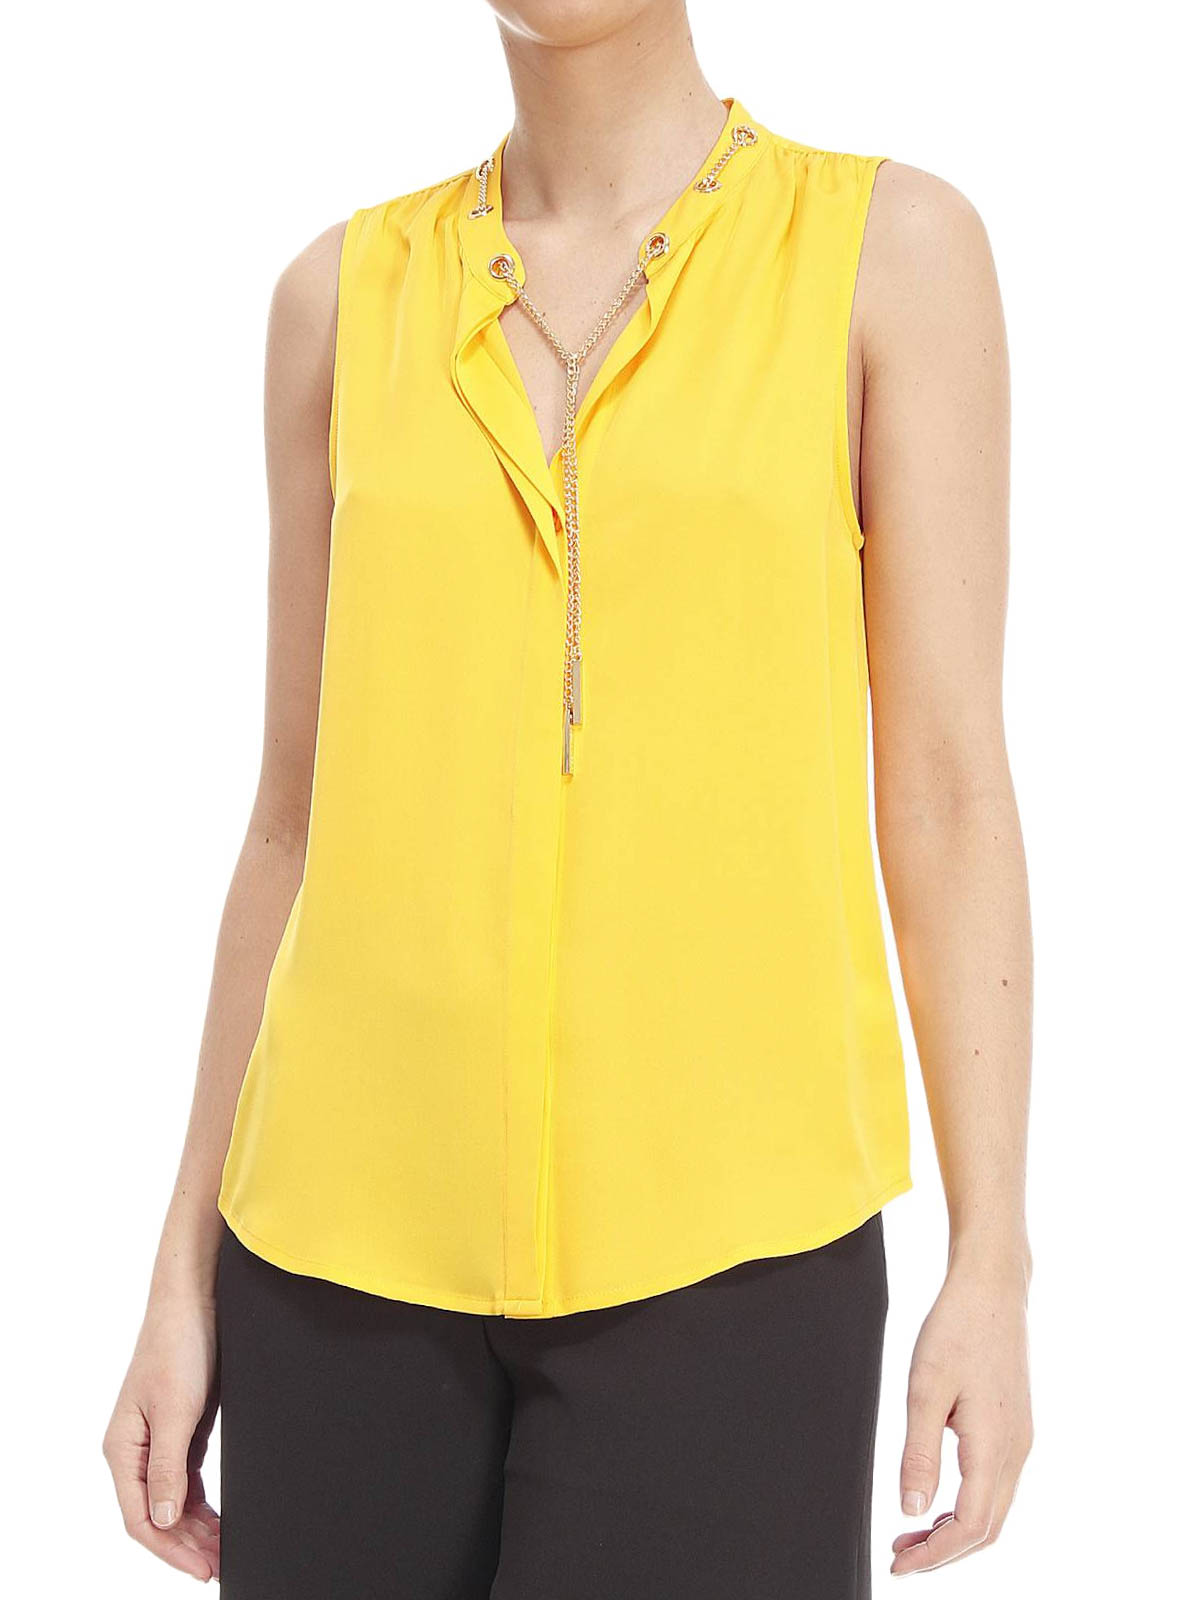 Tops & Tank tops Michael Michael Kors - Silk top with chain detail -  MS54K60VY0719